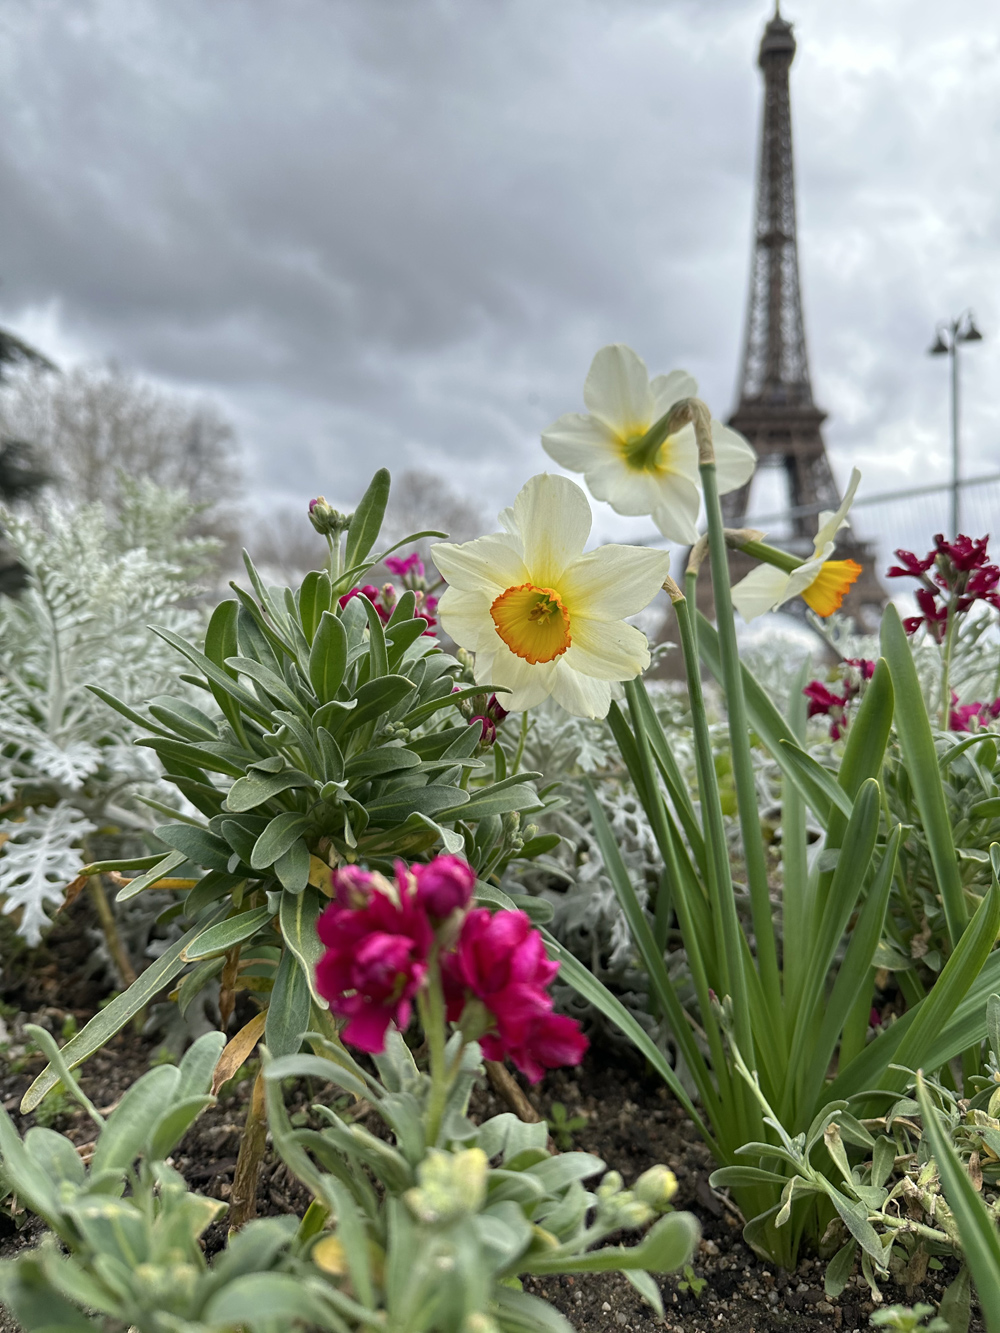 Narcissus admires the Eiffel Tower